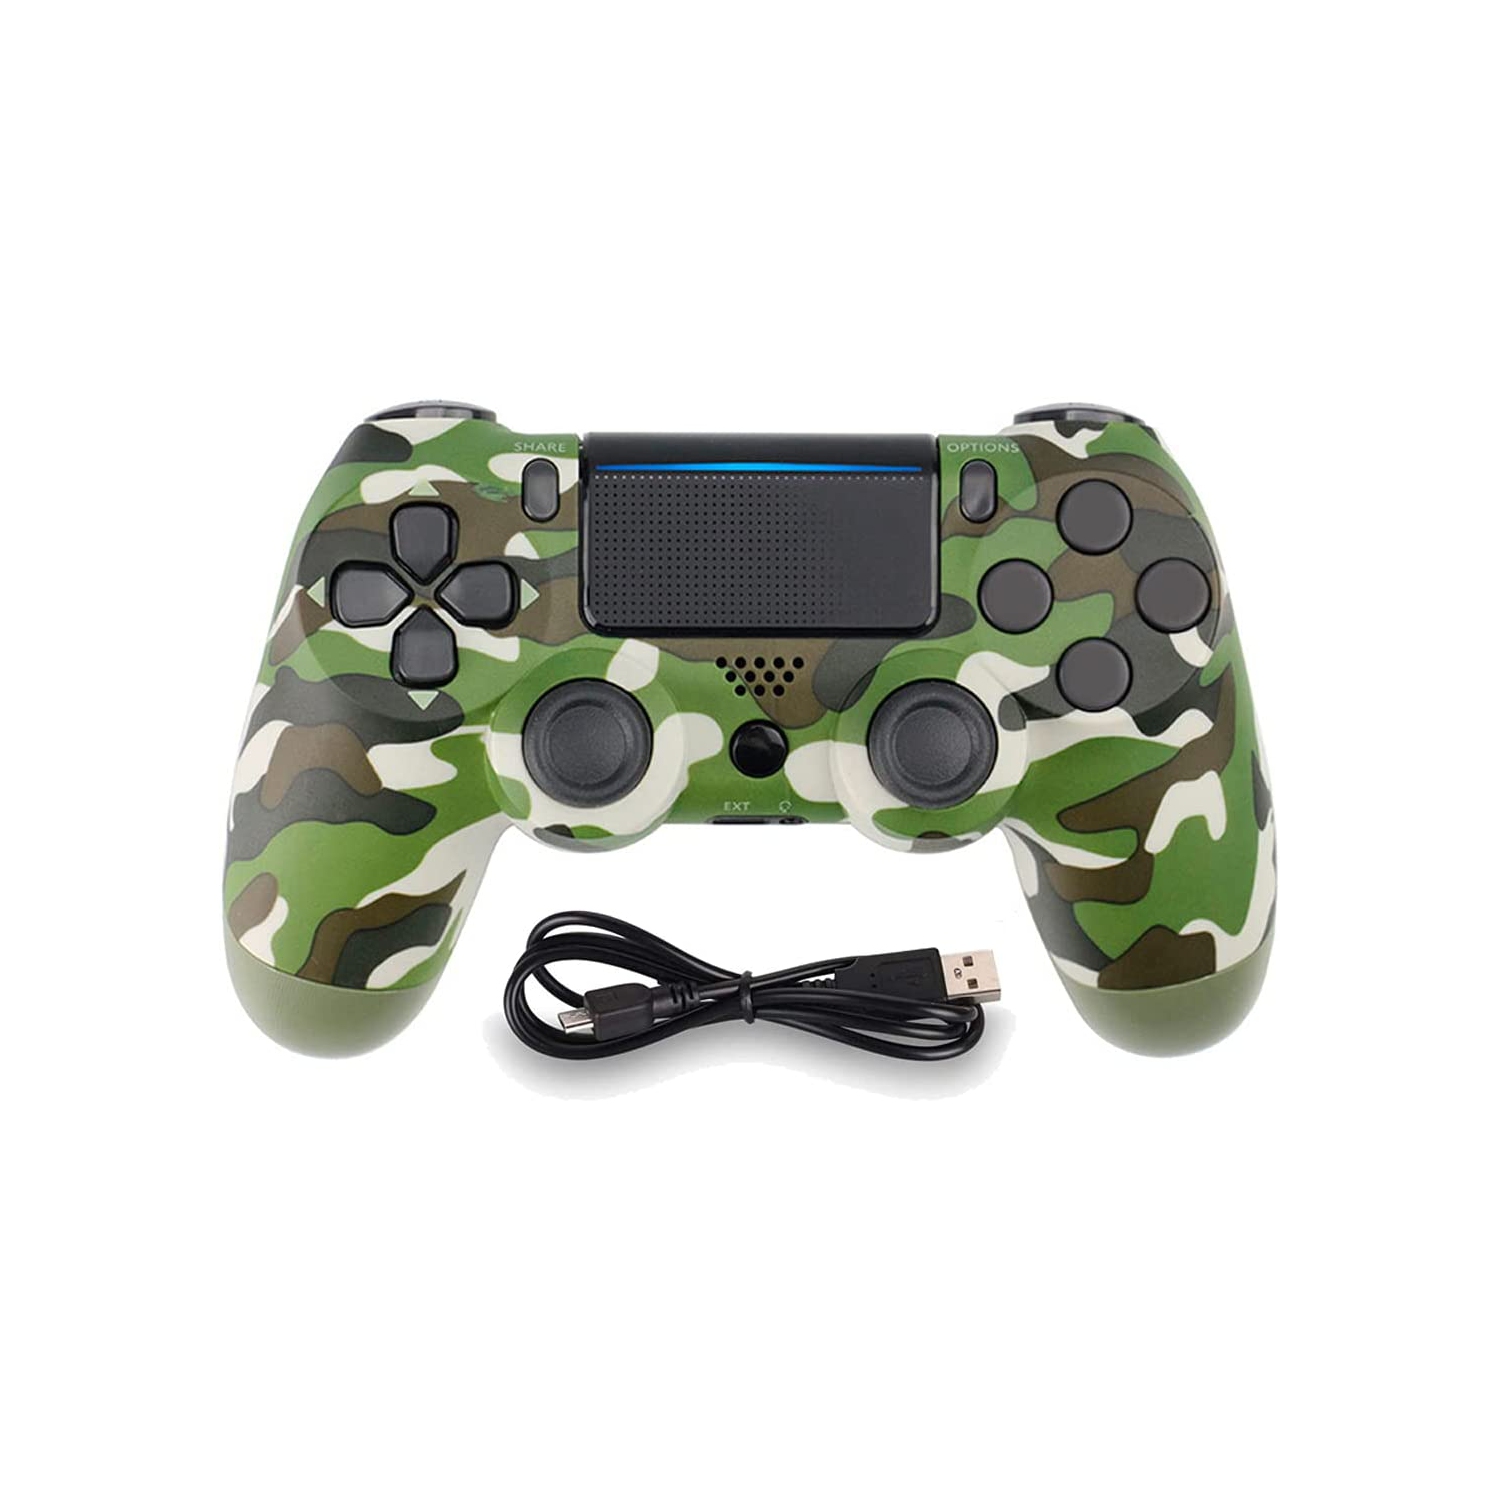 Wireless Controller Compatible for PS4 Playstation 4 / Slim/Pro Console, Double Vibration, 6-Axis Gyro Sensor, Speaker, Built-in Audio Jack with Charging Cable (Green Camouflage)